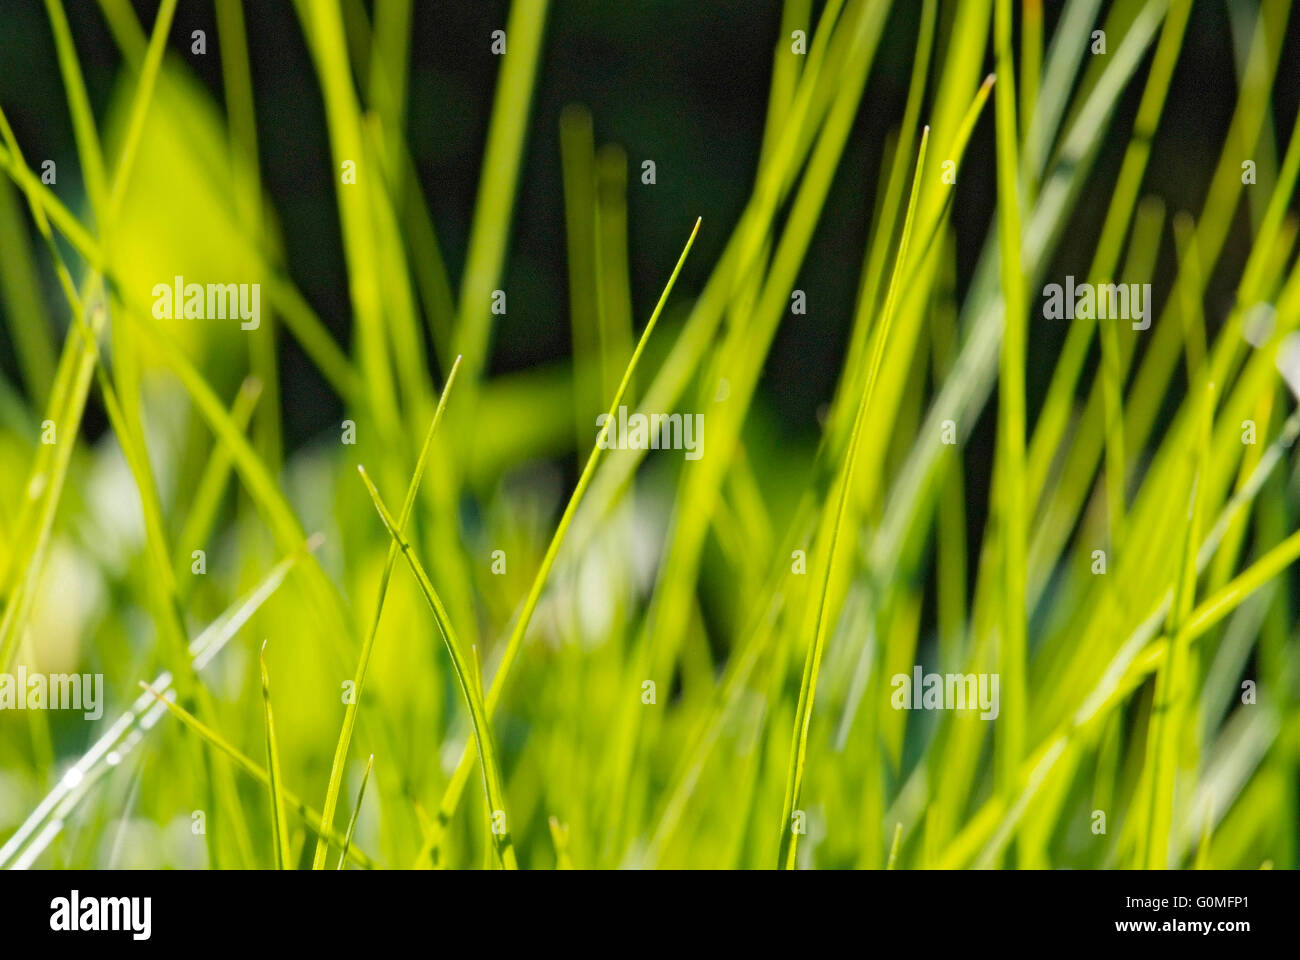 close up young leaves of grass Stock Photo